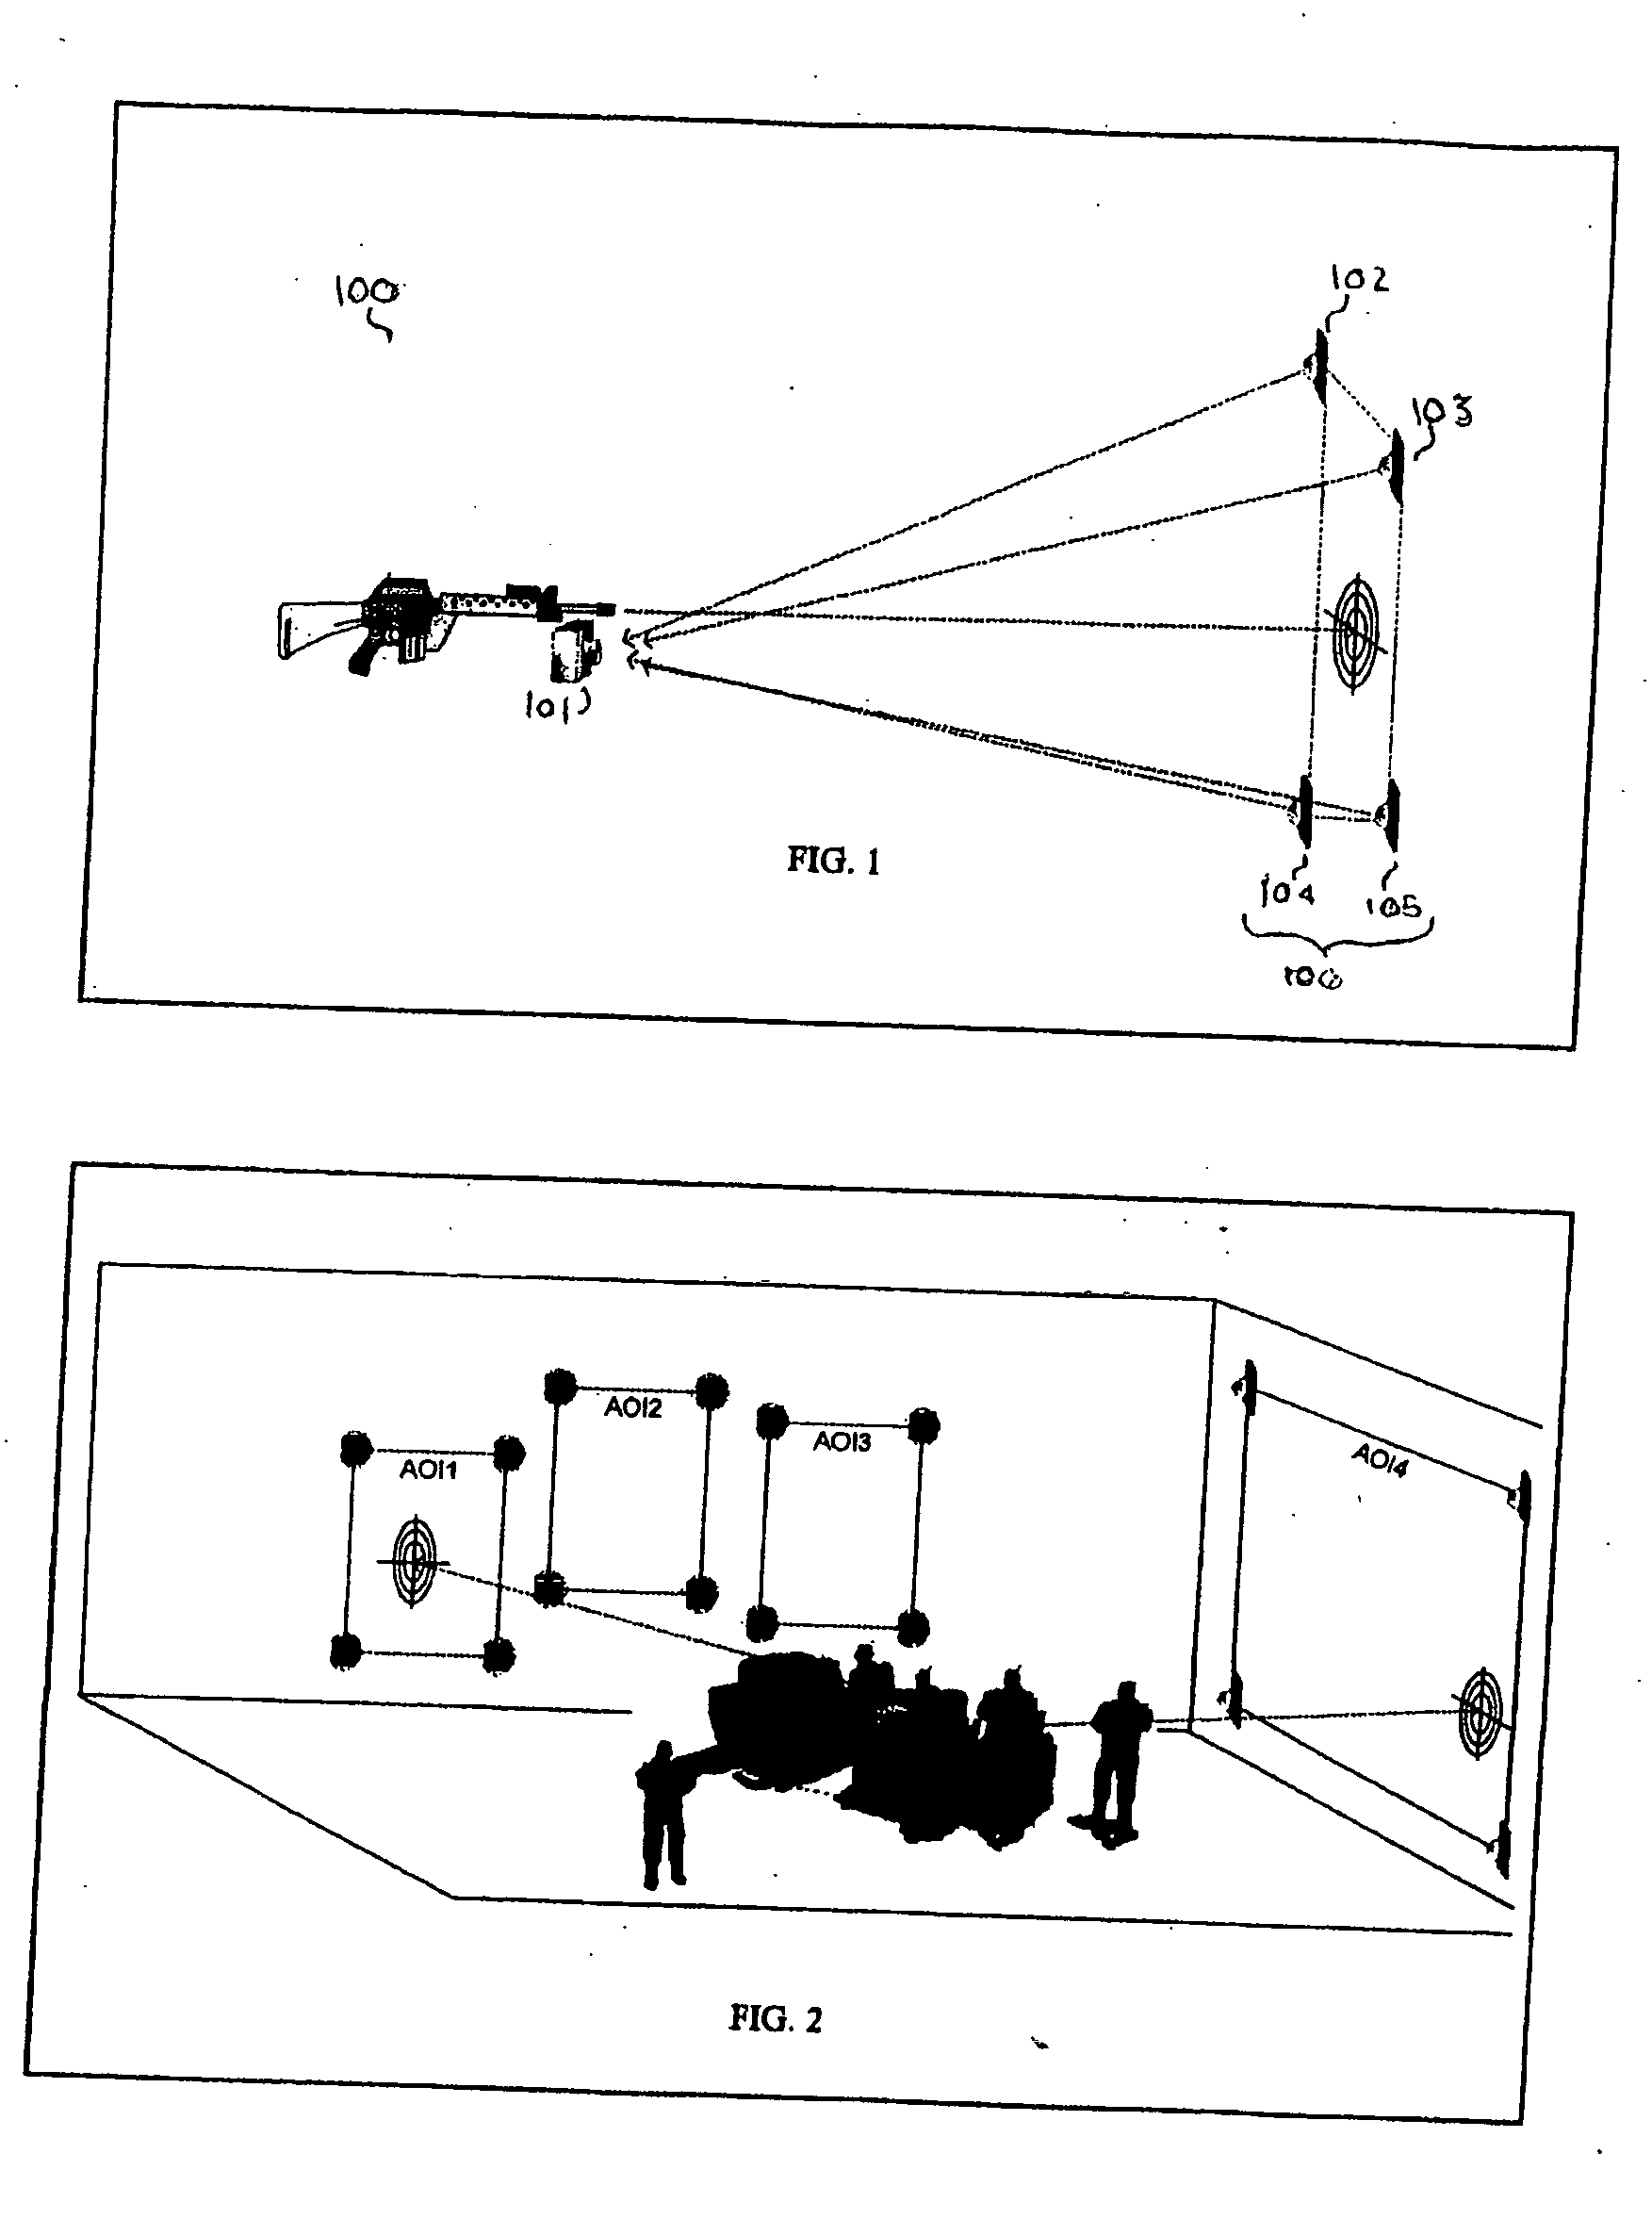 Perspective tracking system